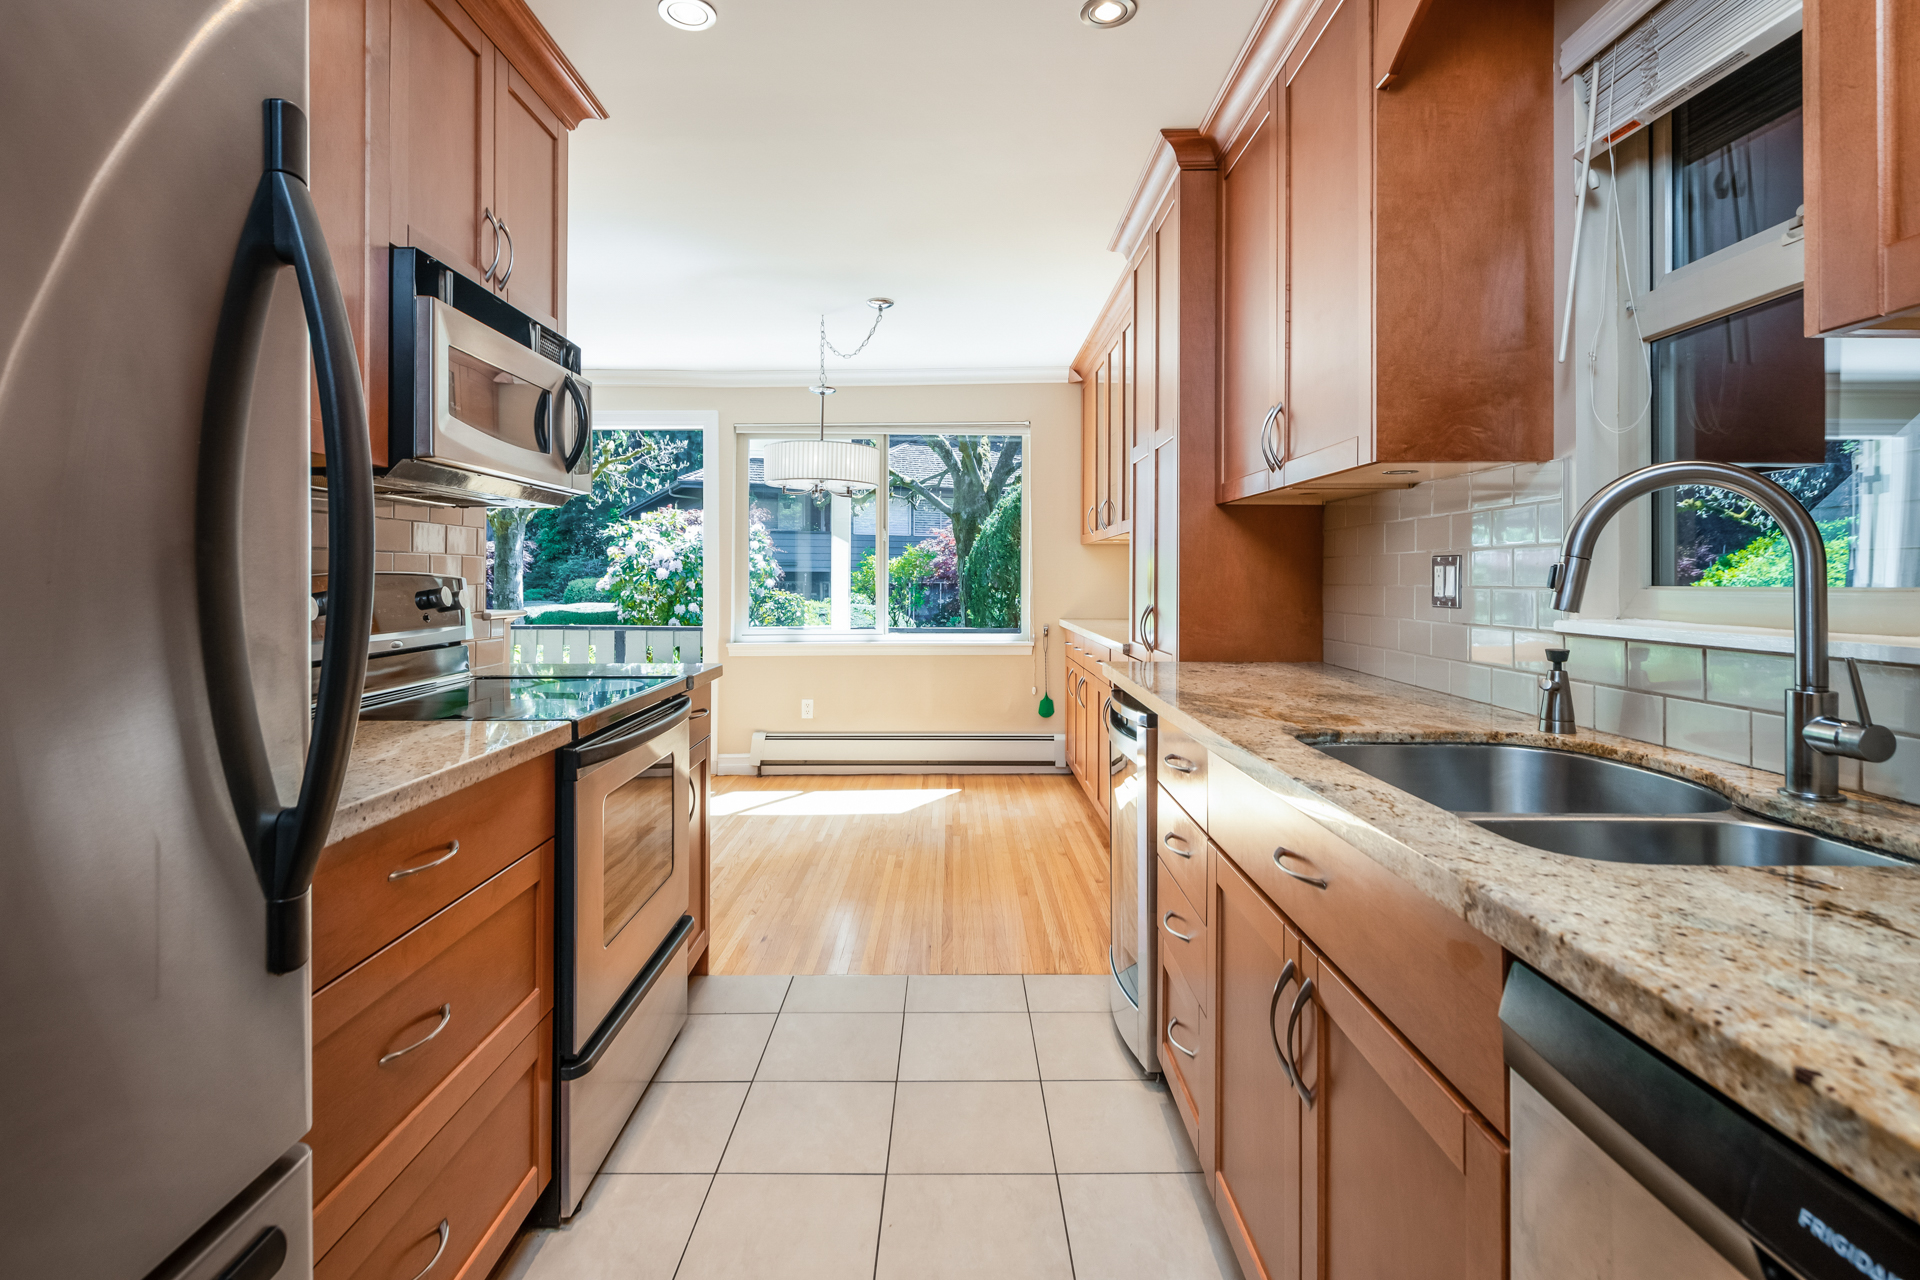 603 235 Keith Road, Spuraway Gardens, West Vancouver - For Sale - Image 4